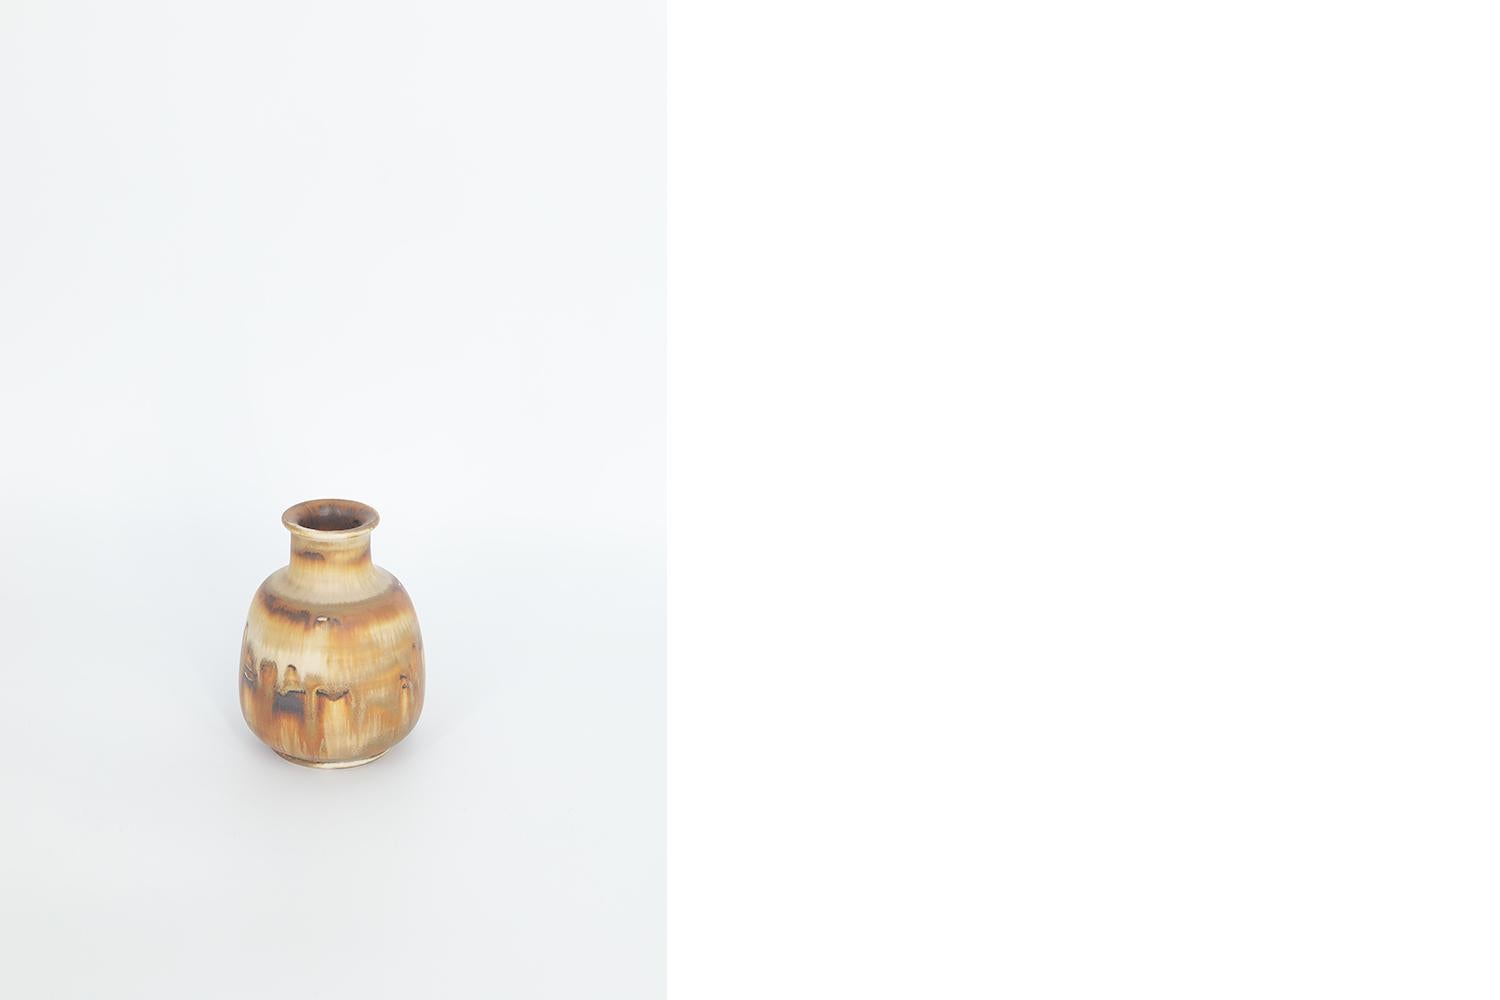 This miniature, collectible stoneware vase was designed by Gunnar Borg for the Swedish manufacture Höganäs Keramik during the 1960s. Handmade by a Master, with the utmost care and attention to details. The vase dyed brown in an irregular shade.